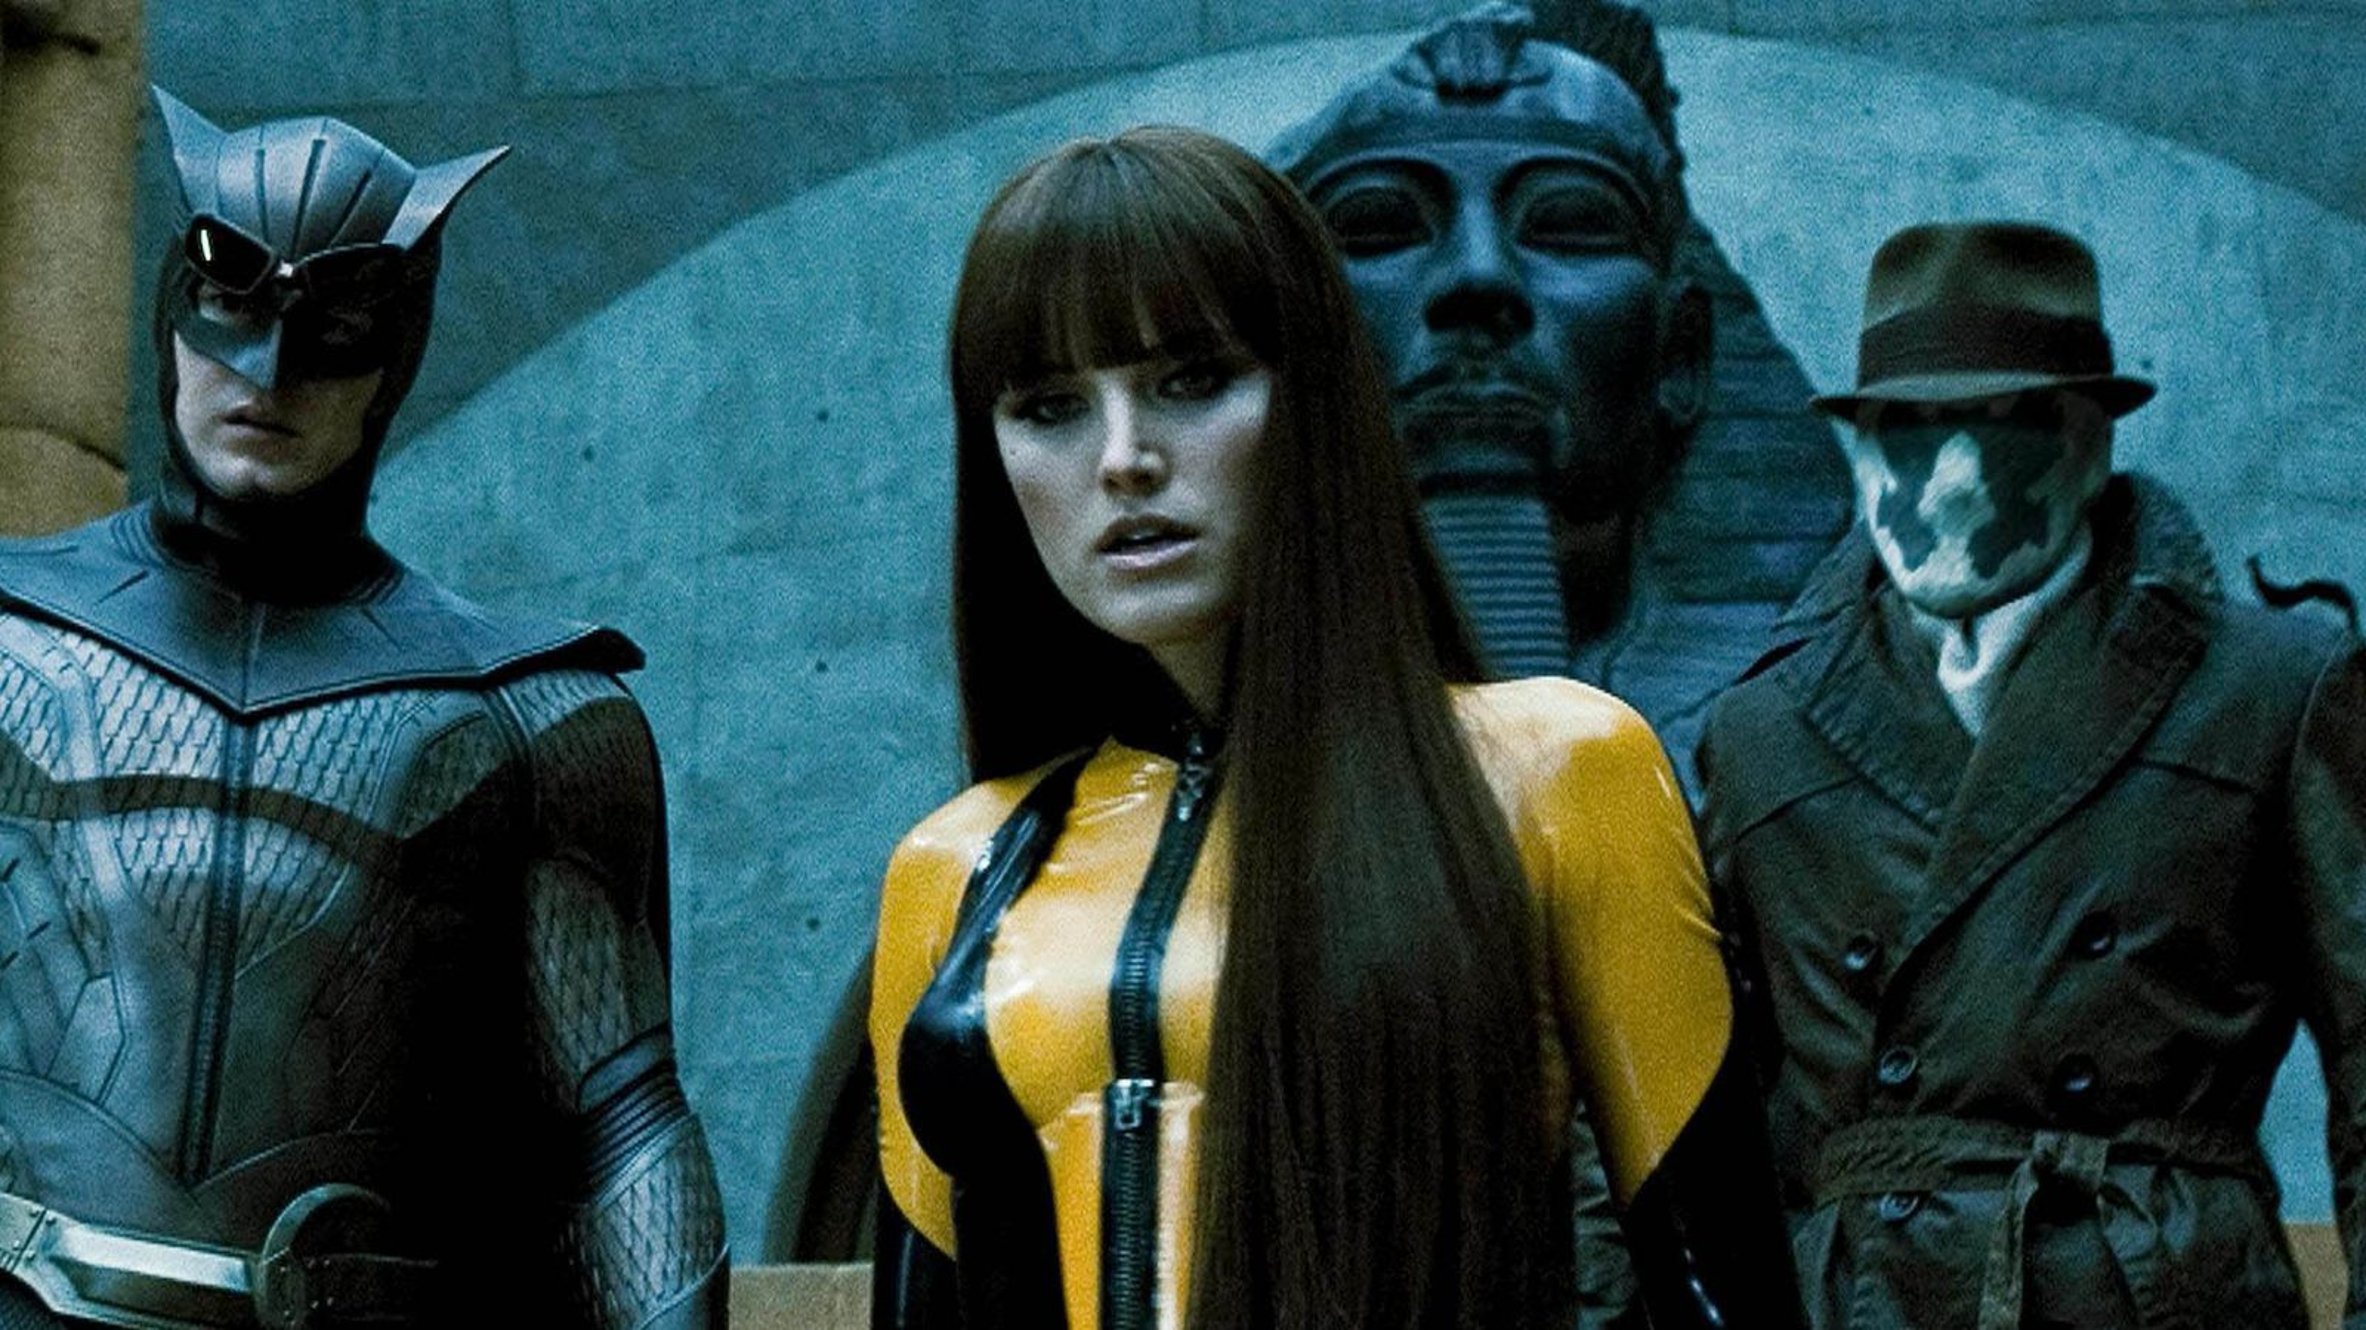 HBO is now casting new talent the Watchmen series!